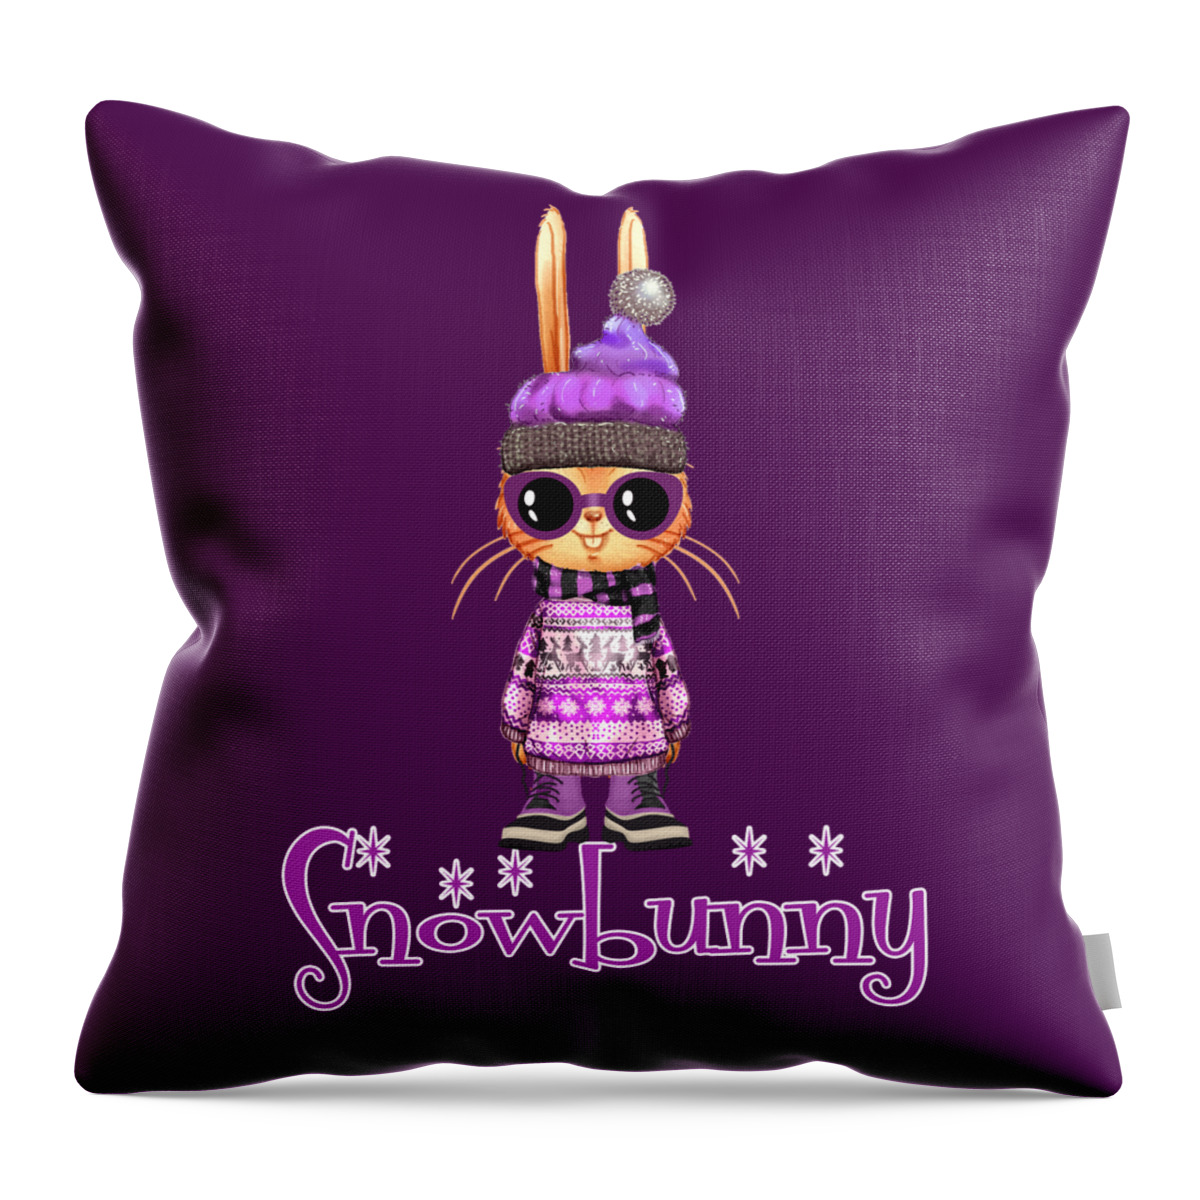 Bunny Throw Pillow featuring the photograph Snowbunny in Ultra Violet by Doreen Erhardt